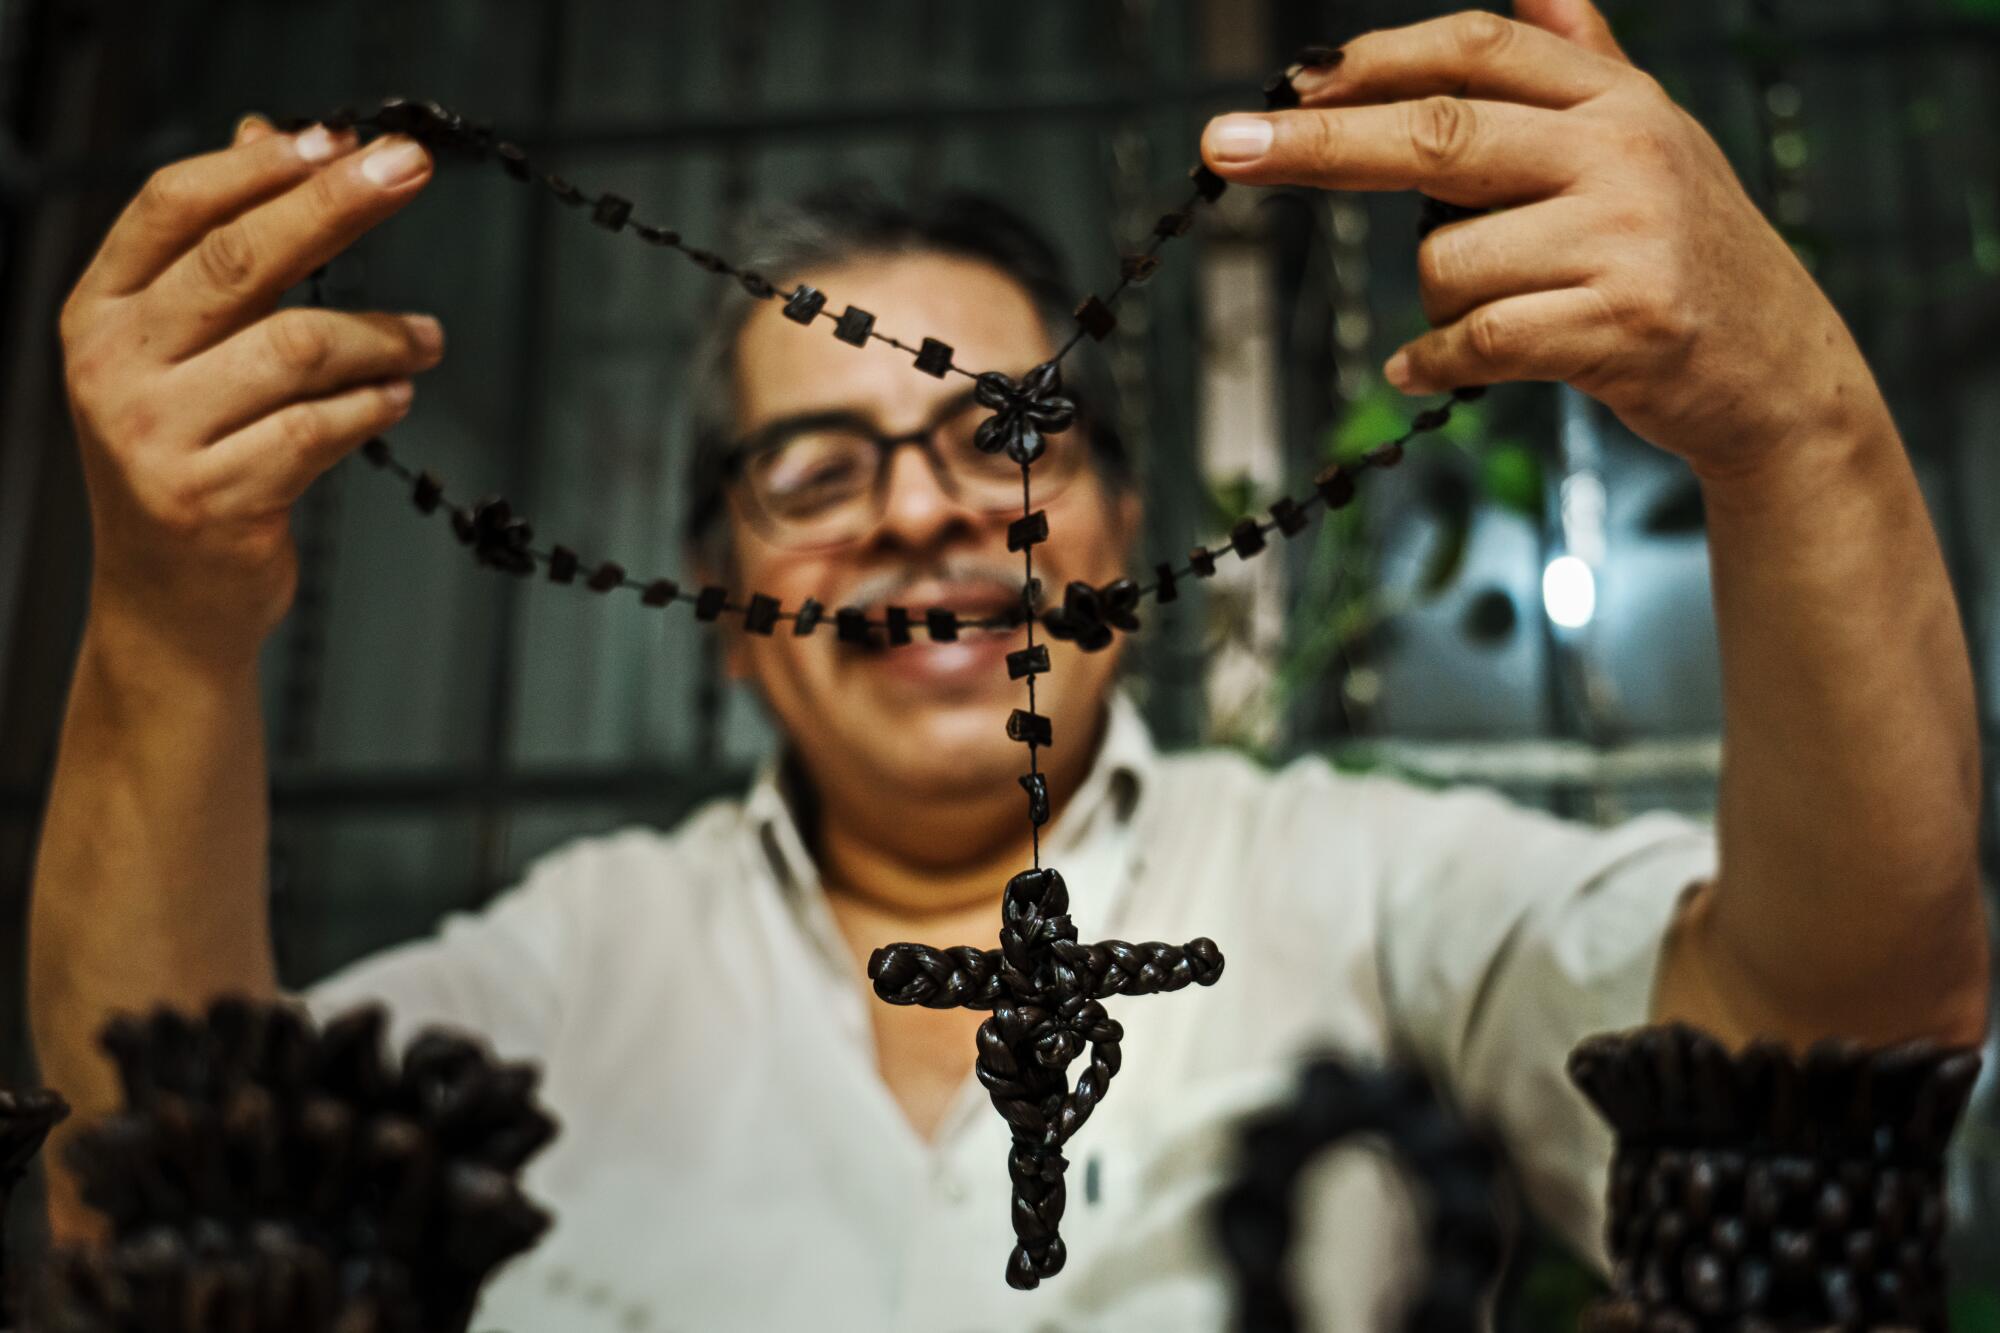 A smiling man wearing glasses holds up a necklace with a cross made out of vanilla beans 